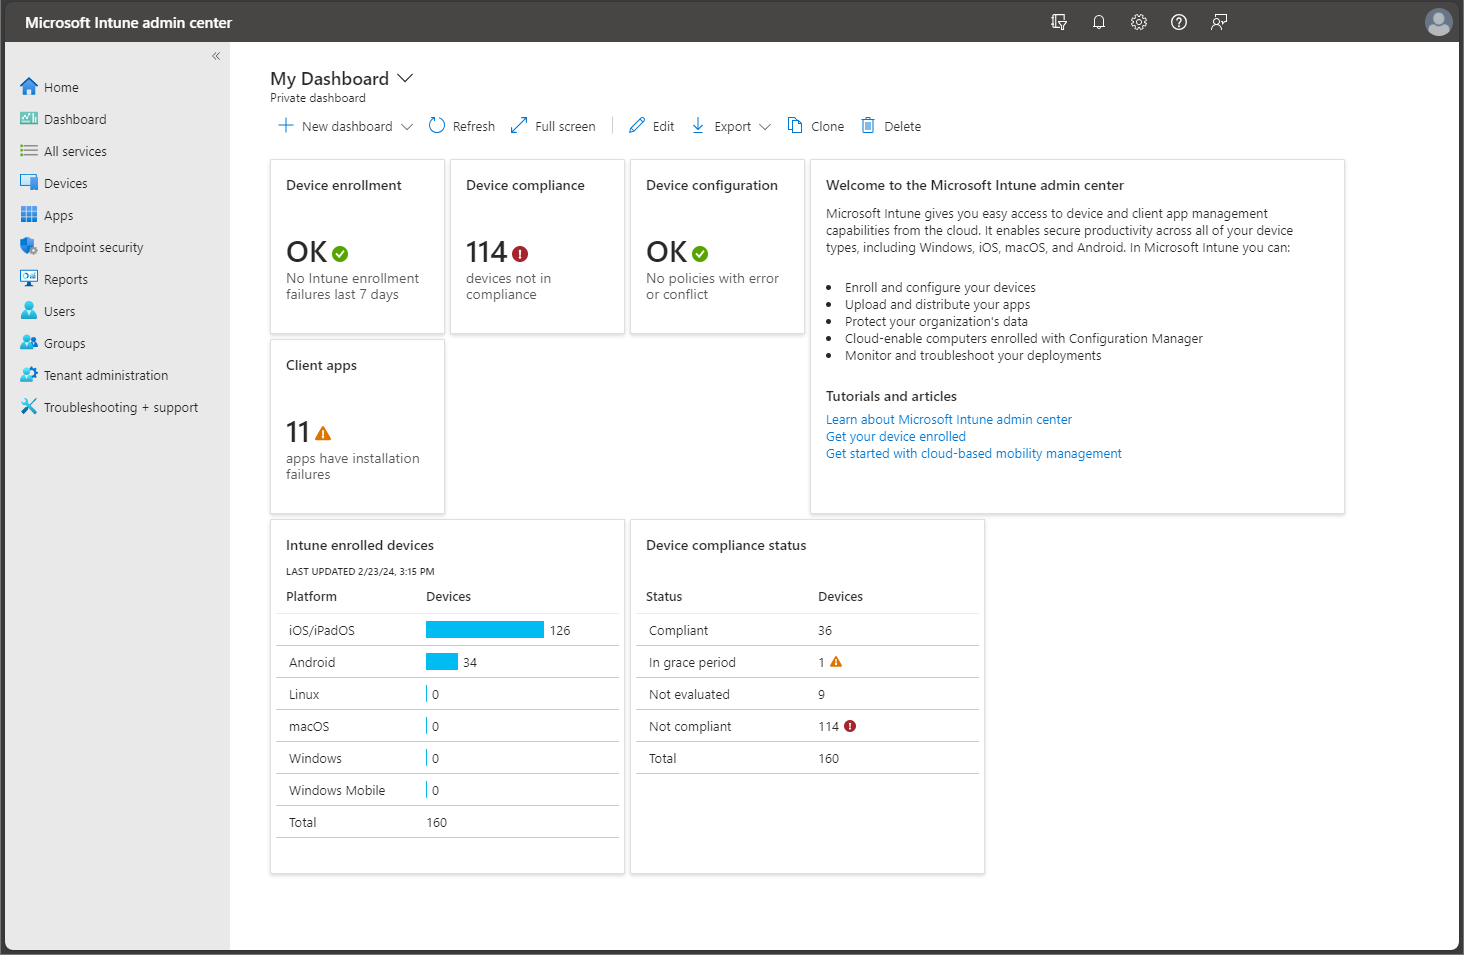 Screenshot of the Microsoft Endpoint Manager admin center - Dashboard